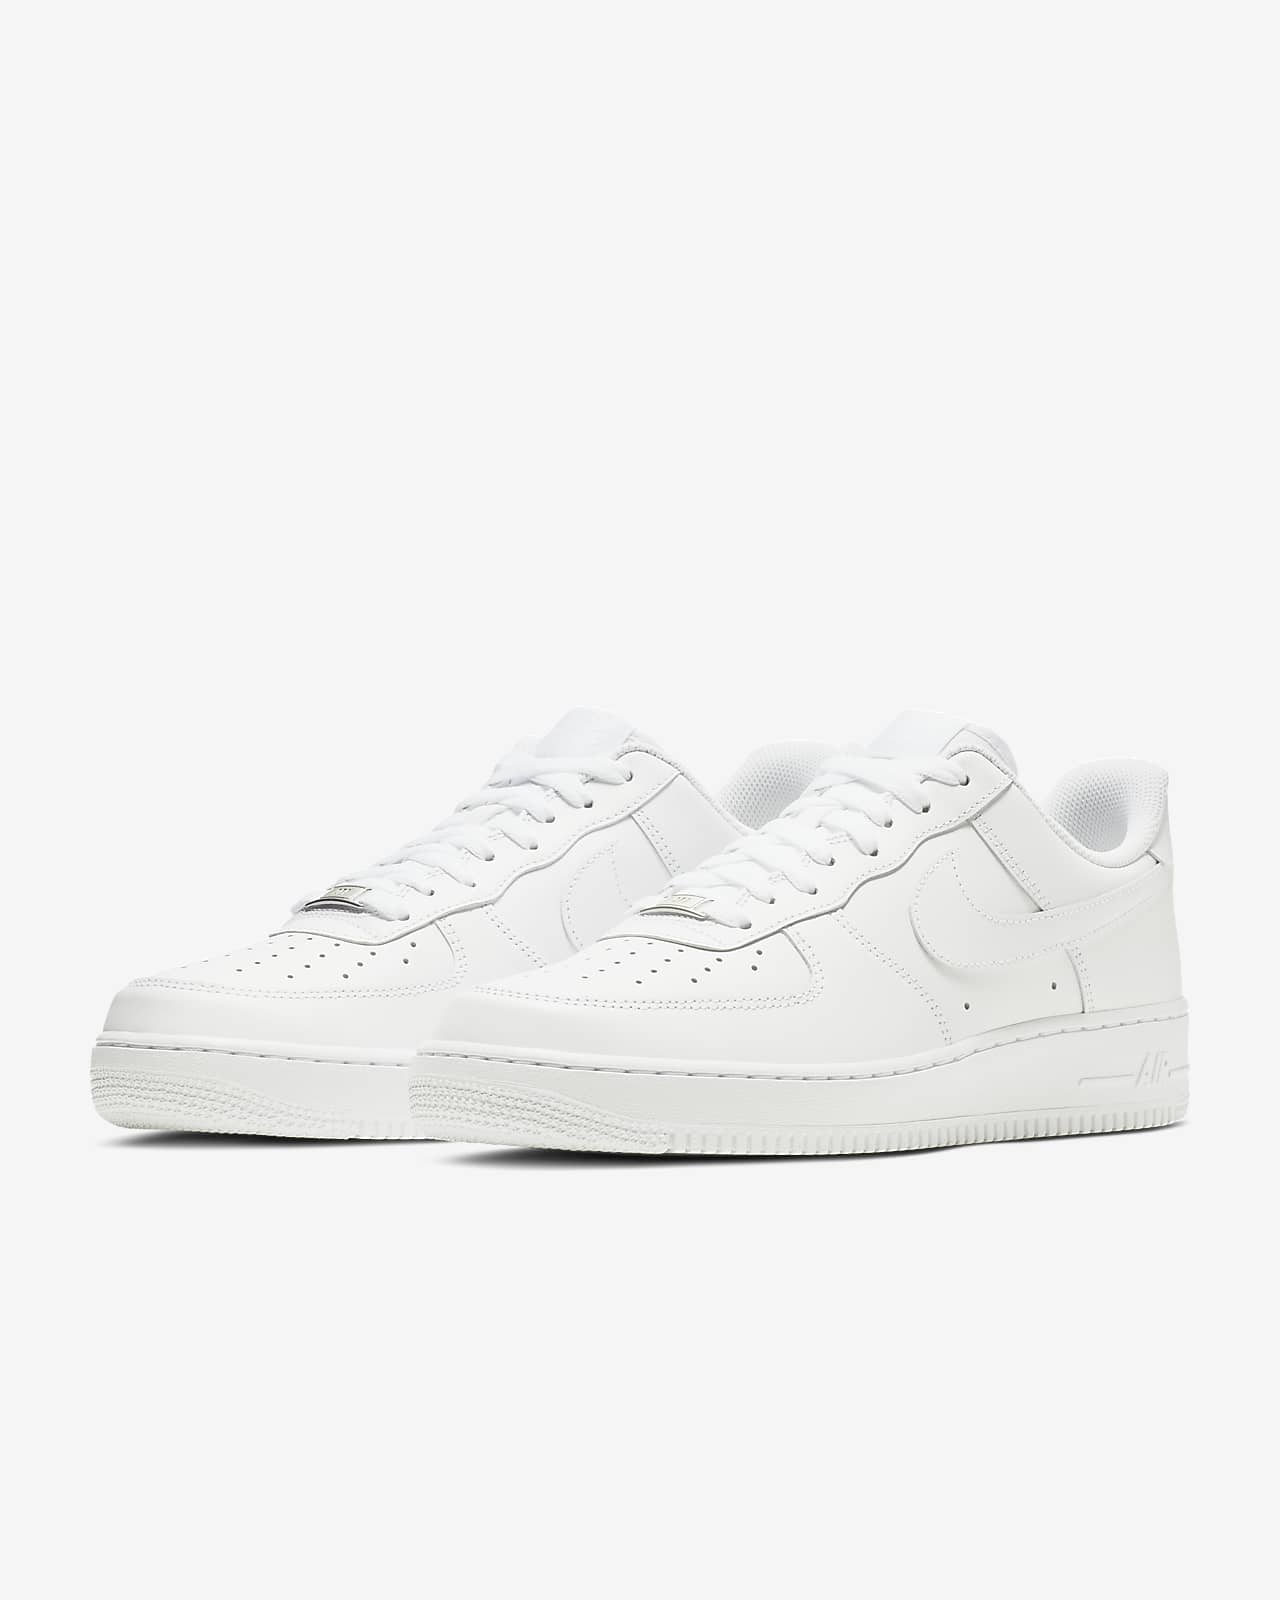 air force 1s in store